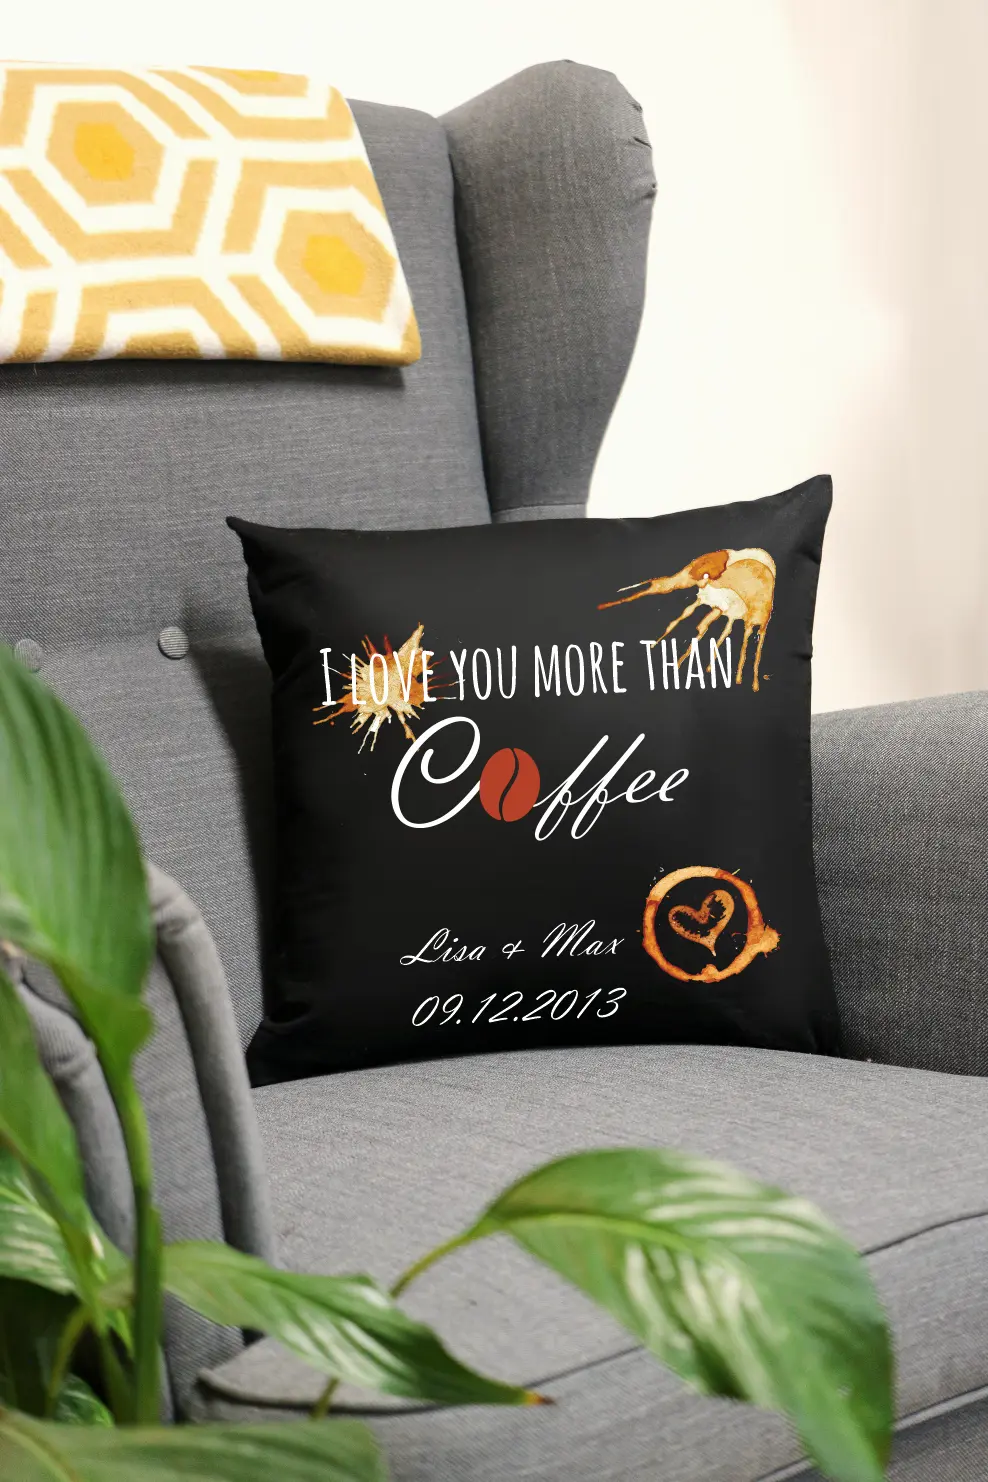 I love you more than coffee | Polster/Kissen   